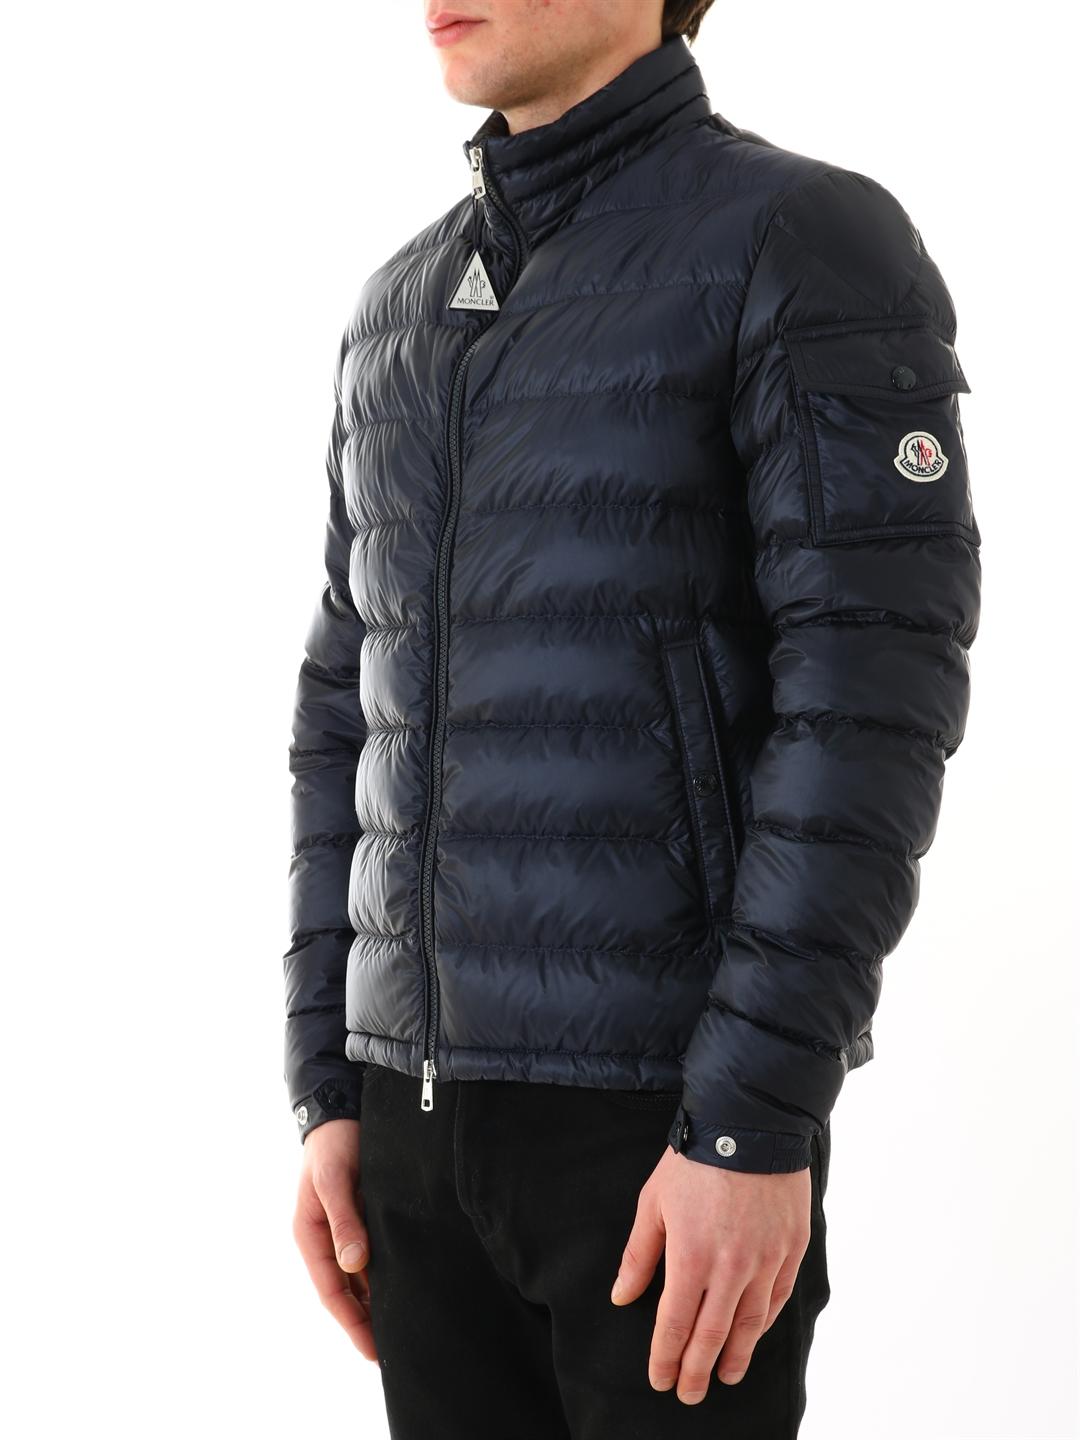 Moncler Synthetic Lambot Jacket in Blue for Men - Lyst